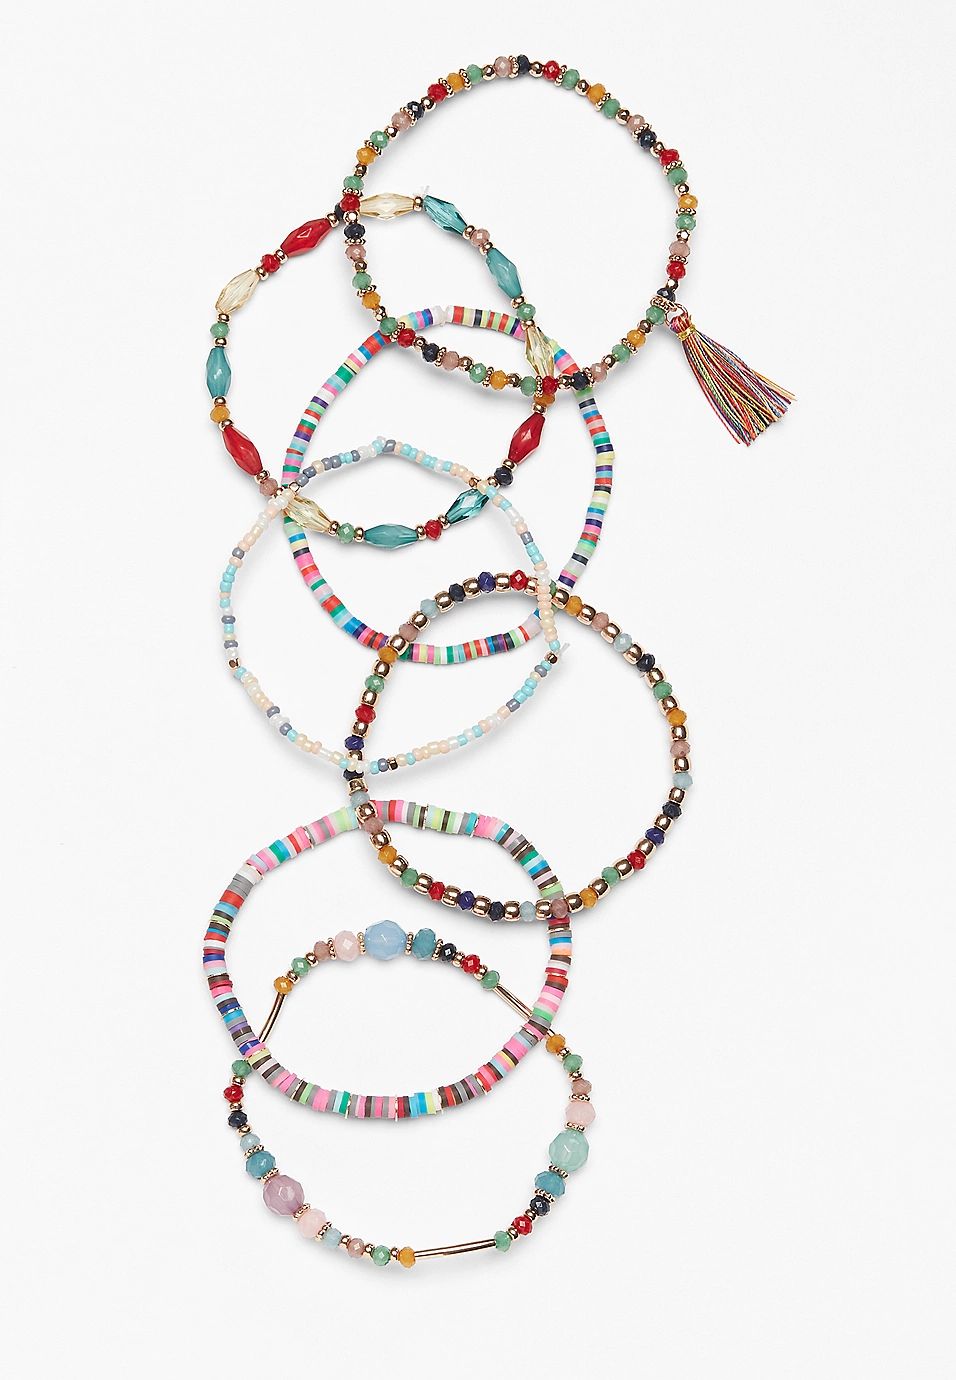 7 Piece Colorful Beaded Stretch Bracelet Set | Maurices